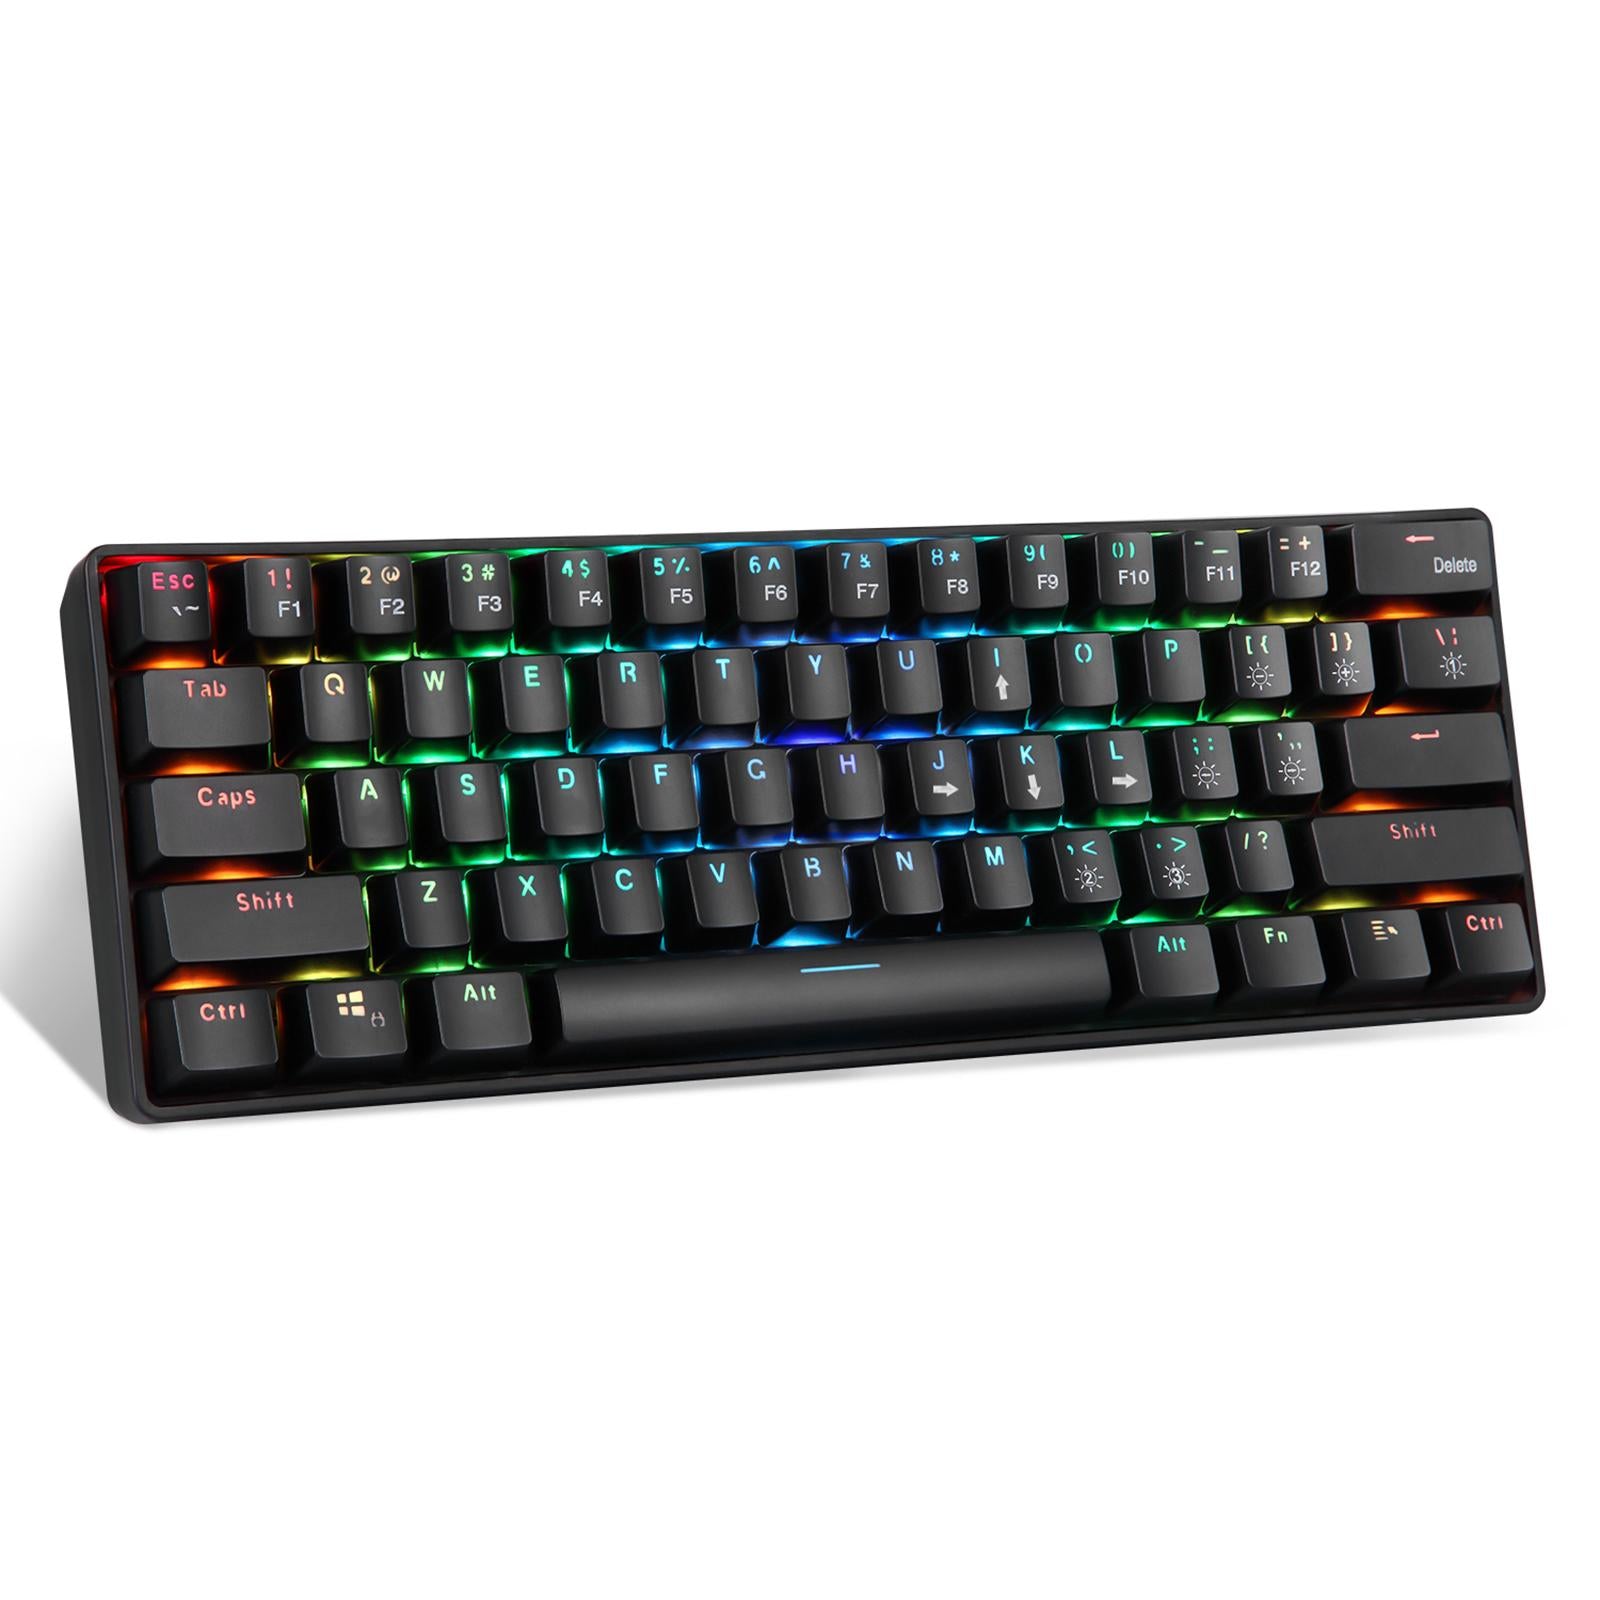 YK600 Mechanical Keyboard RGB Backlight Keyboards for PC Gamer Red Switch